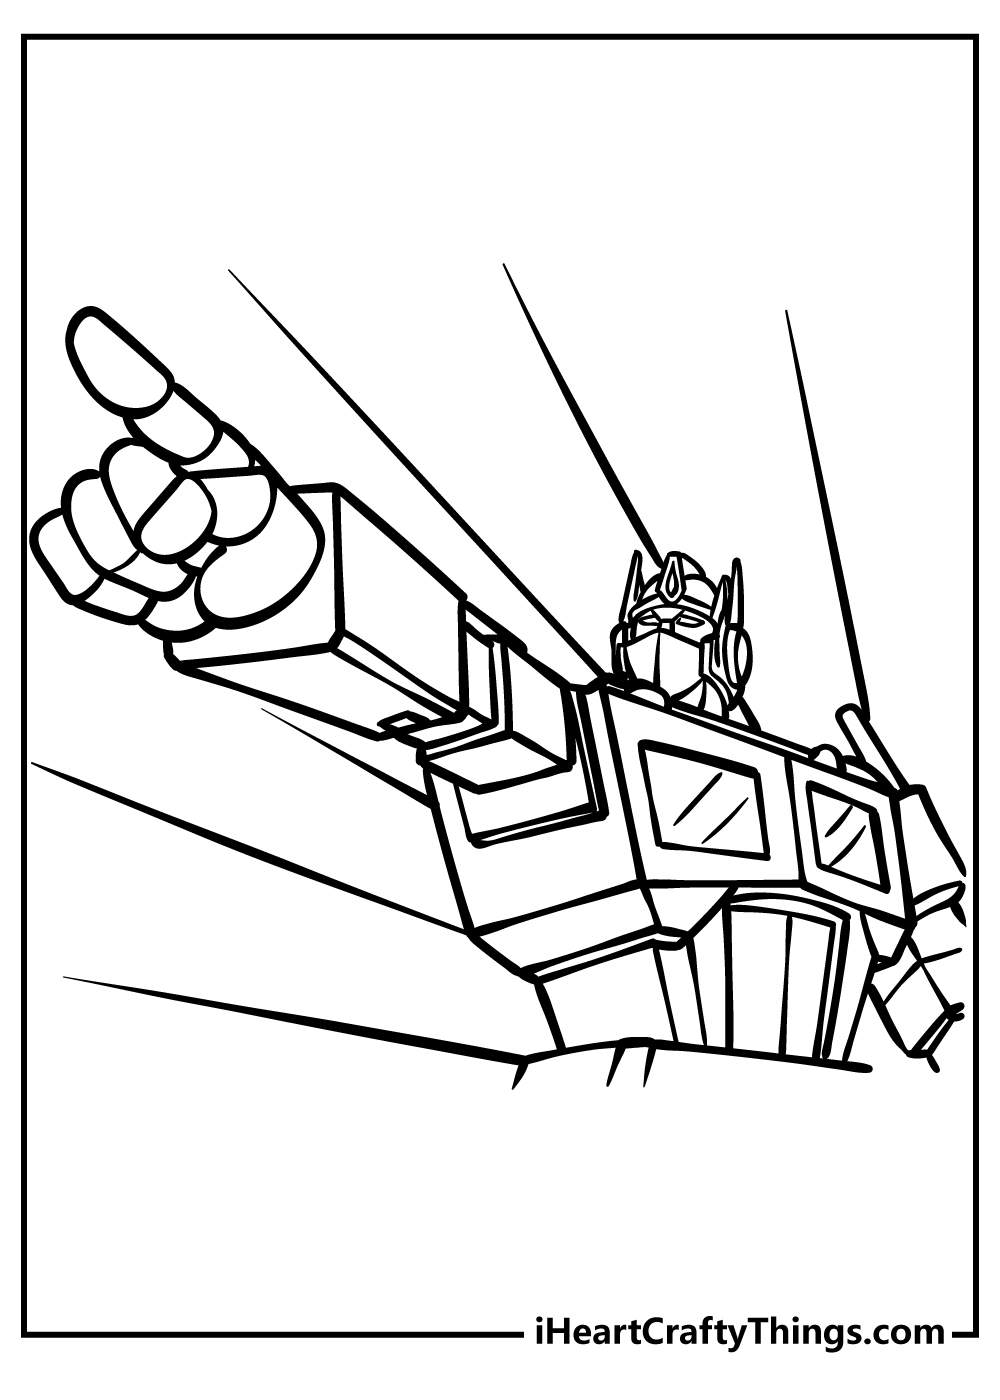 Transformers coloring pages free printables